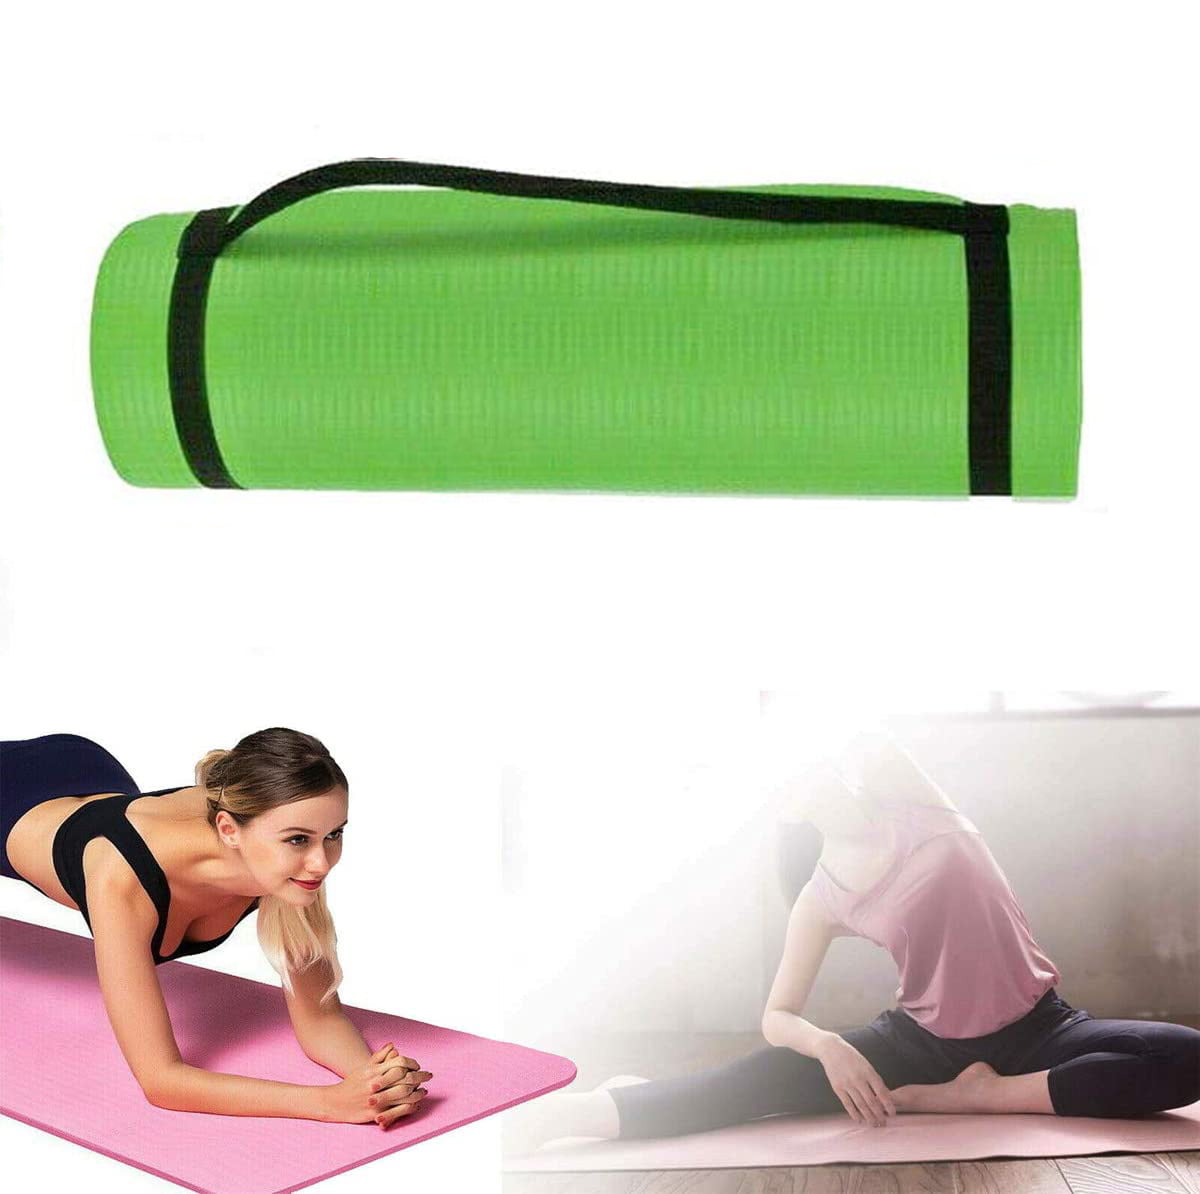 MeMO Pilates Yoga Head Pad with Washable Cover Foam Block Exercise Support Gym 